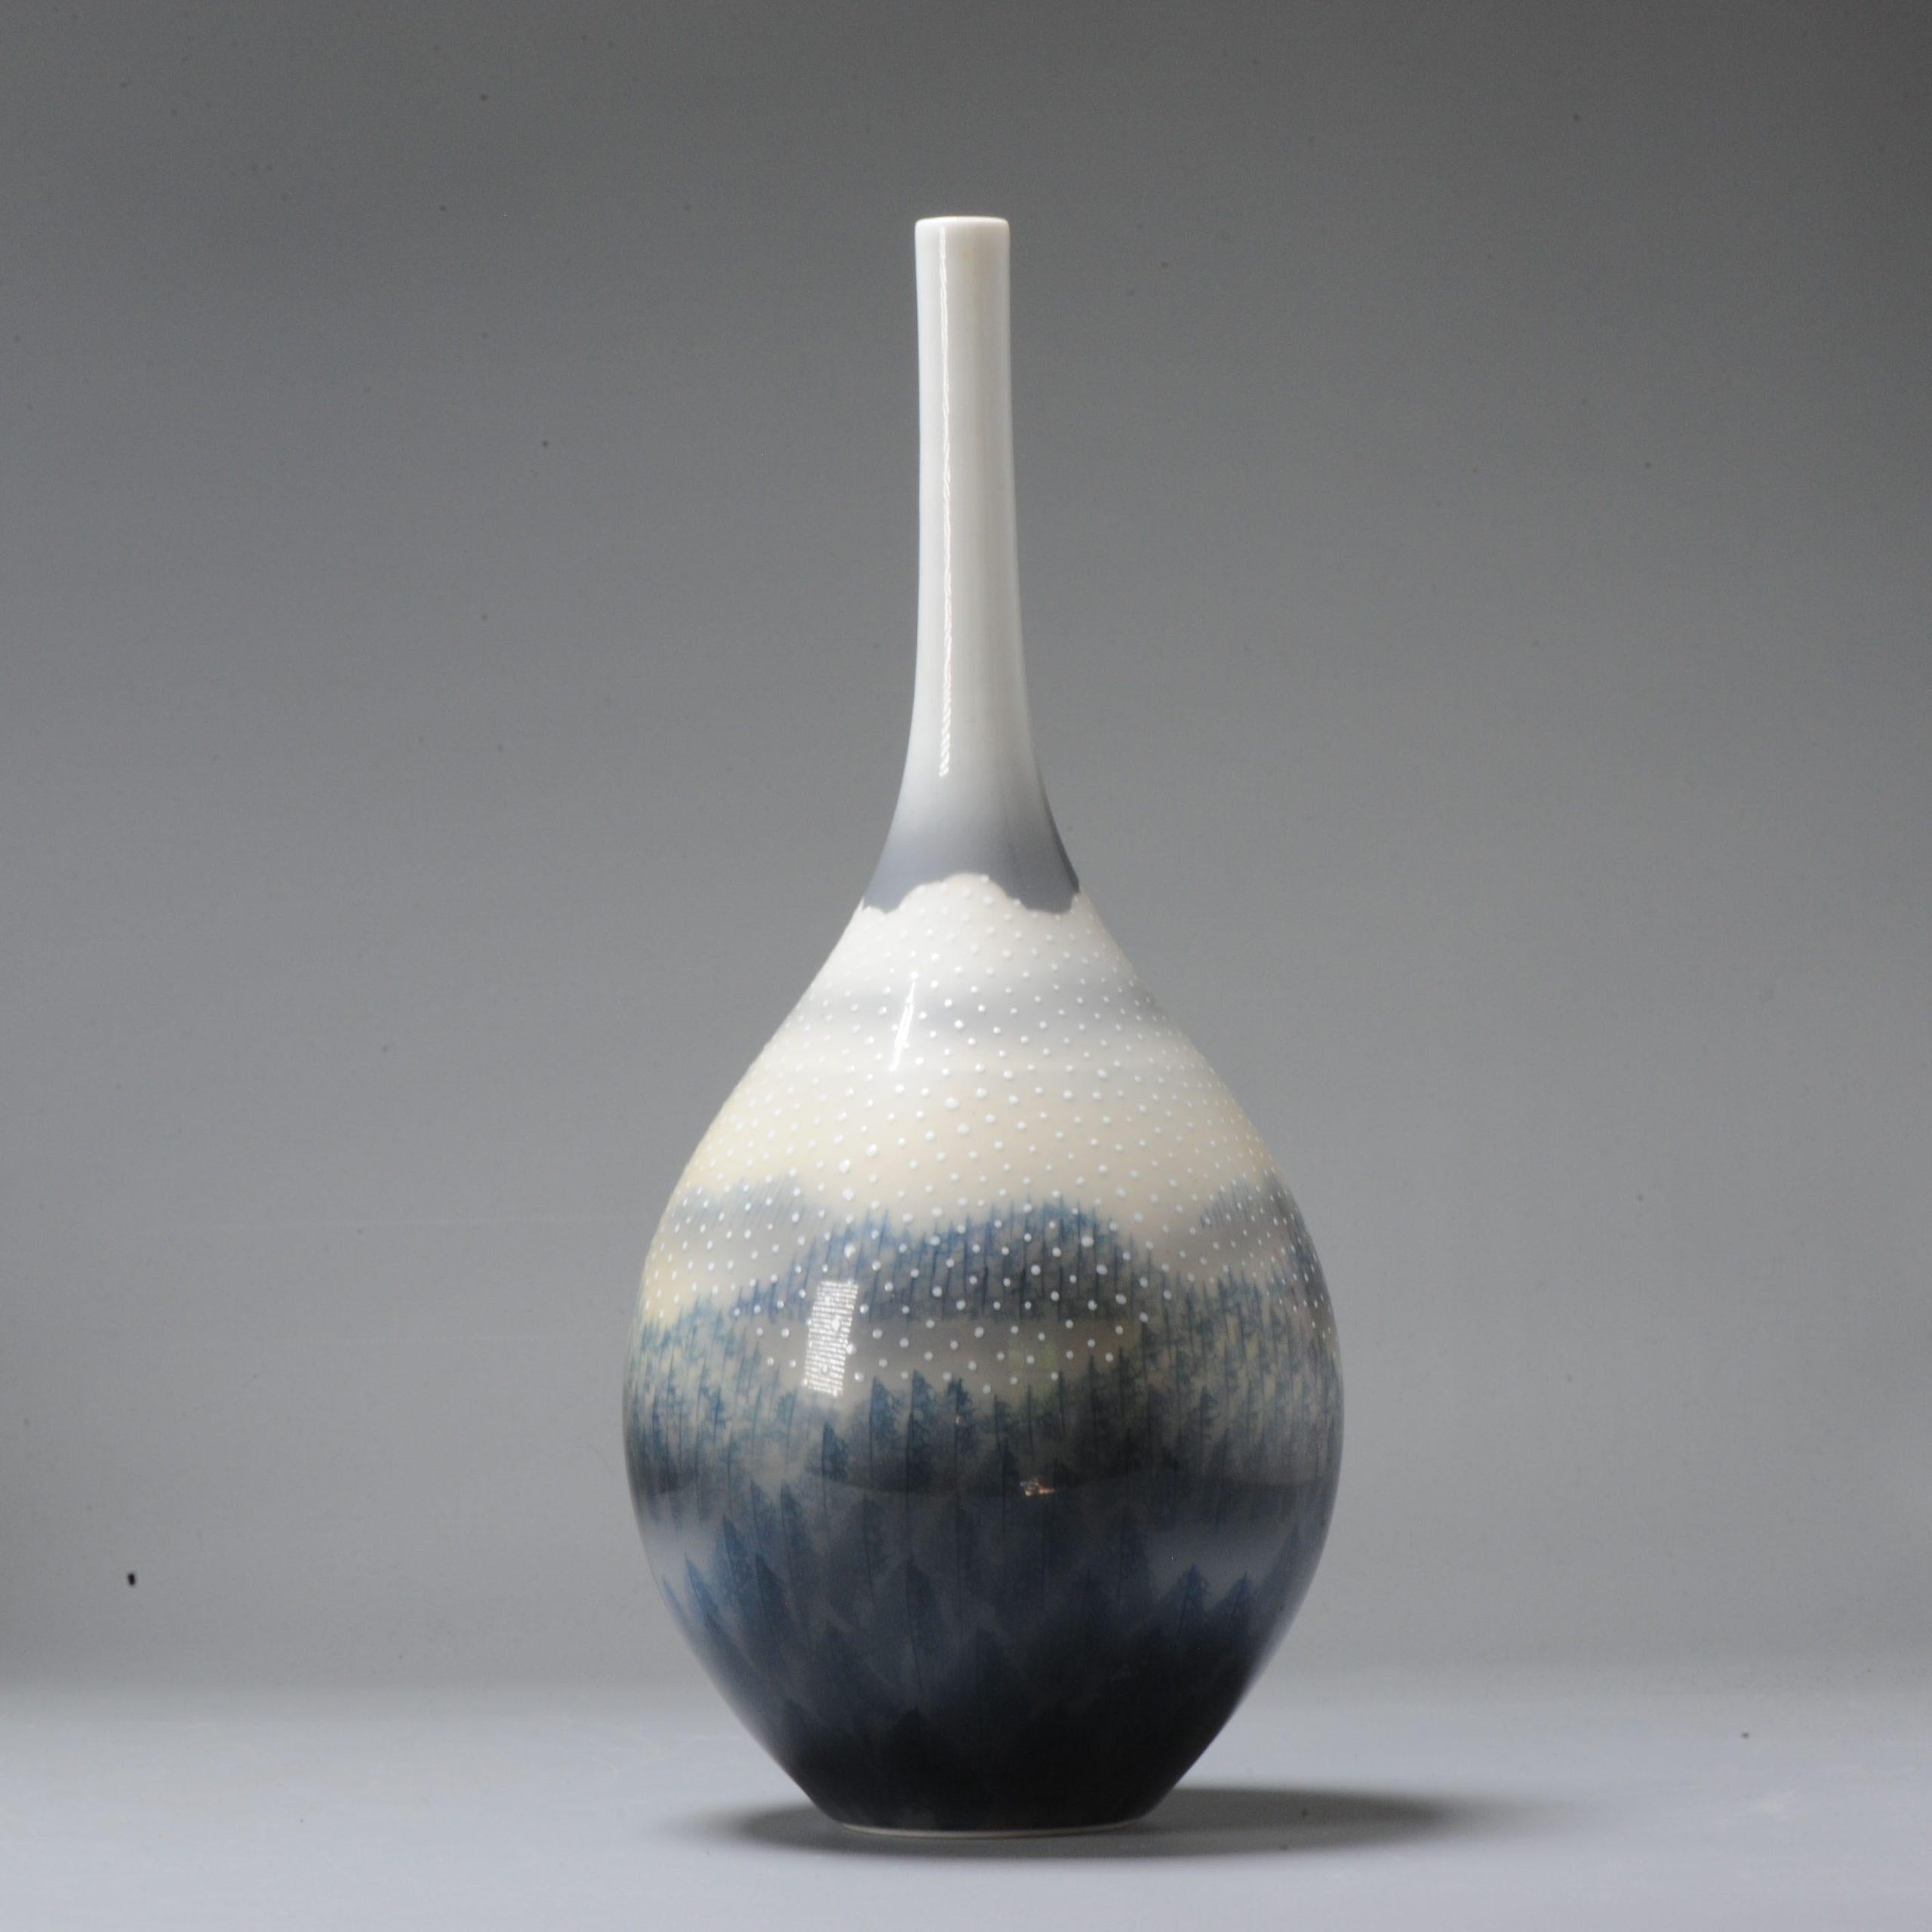 Lovely and rare piece.

A superb porcelain vase, with a night winter landscape. Made by Fuji Shumei

Fujii Mr. Aki Fujii's specialty is the technique of drawing a mountain by simulating the veins of a leaf, called the “leaf technique”, as if it